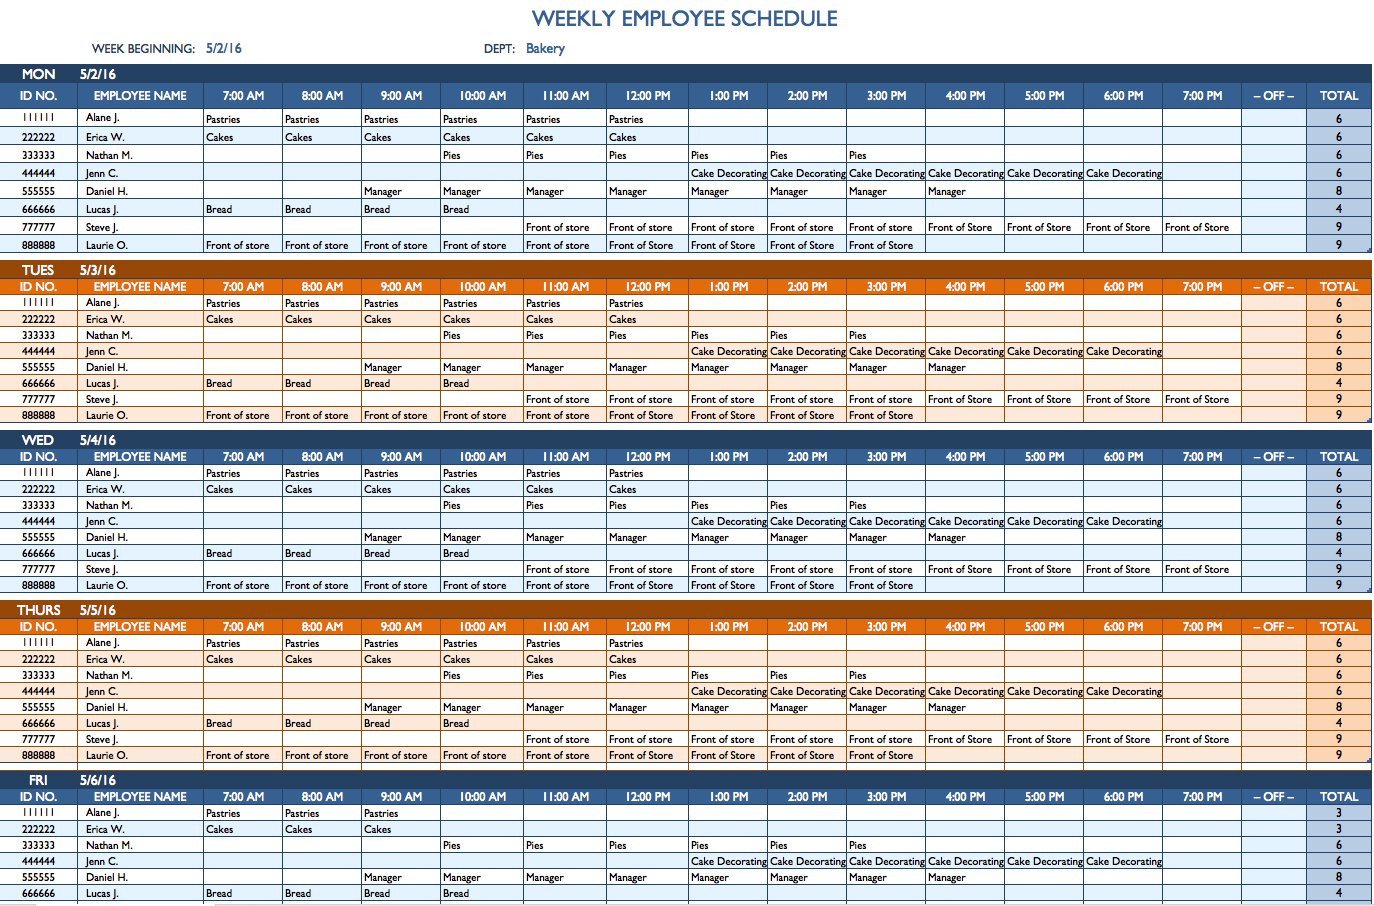 Excel Employee Schedule Templates Free Weekly Schedule Templates for Excel Smartsheet